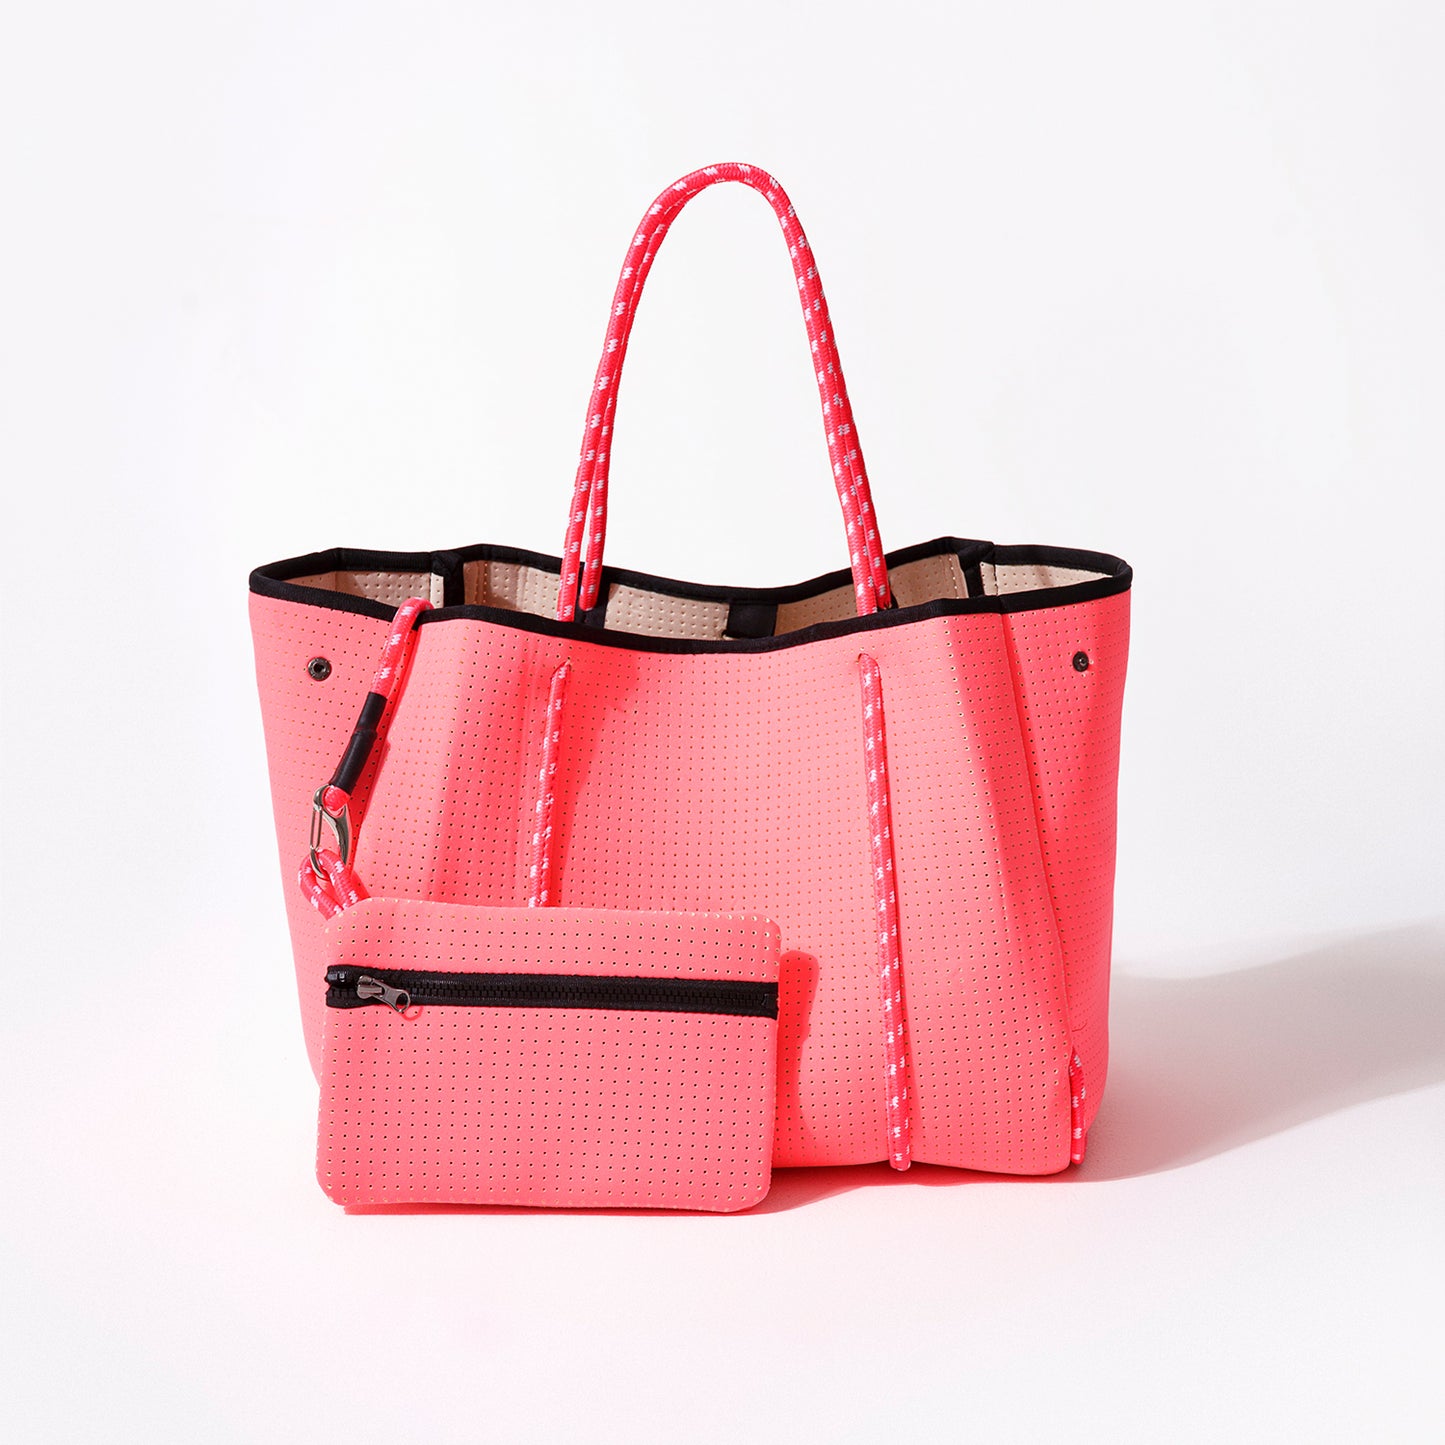 EVERYDAY TOTE NEON PINK